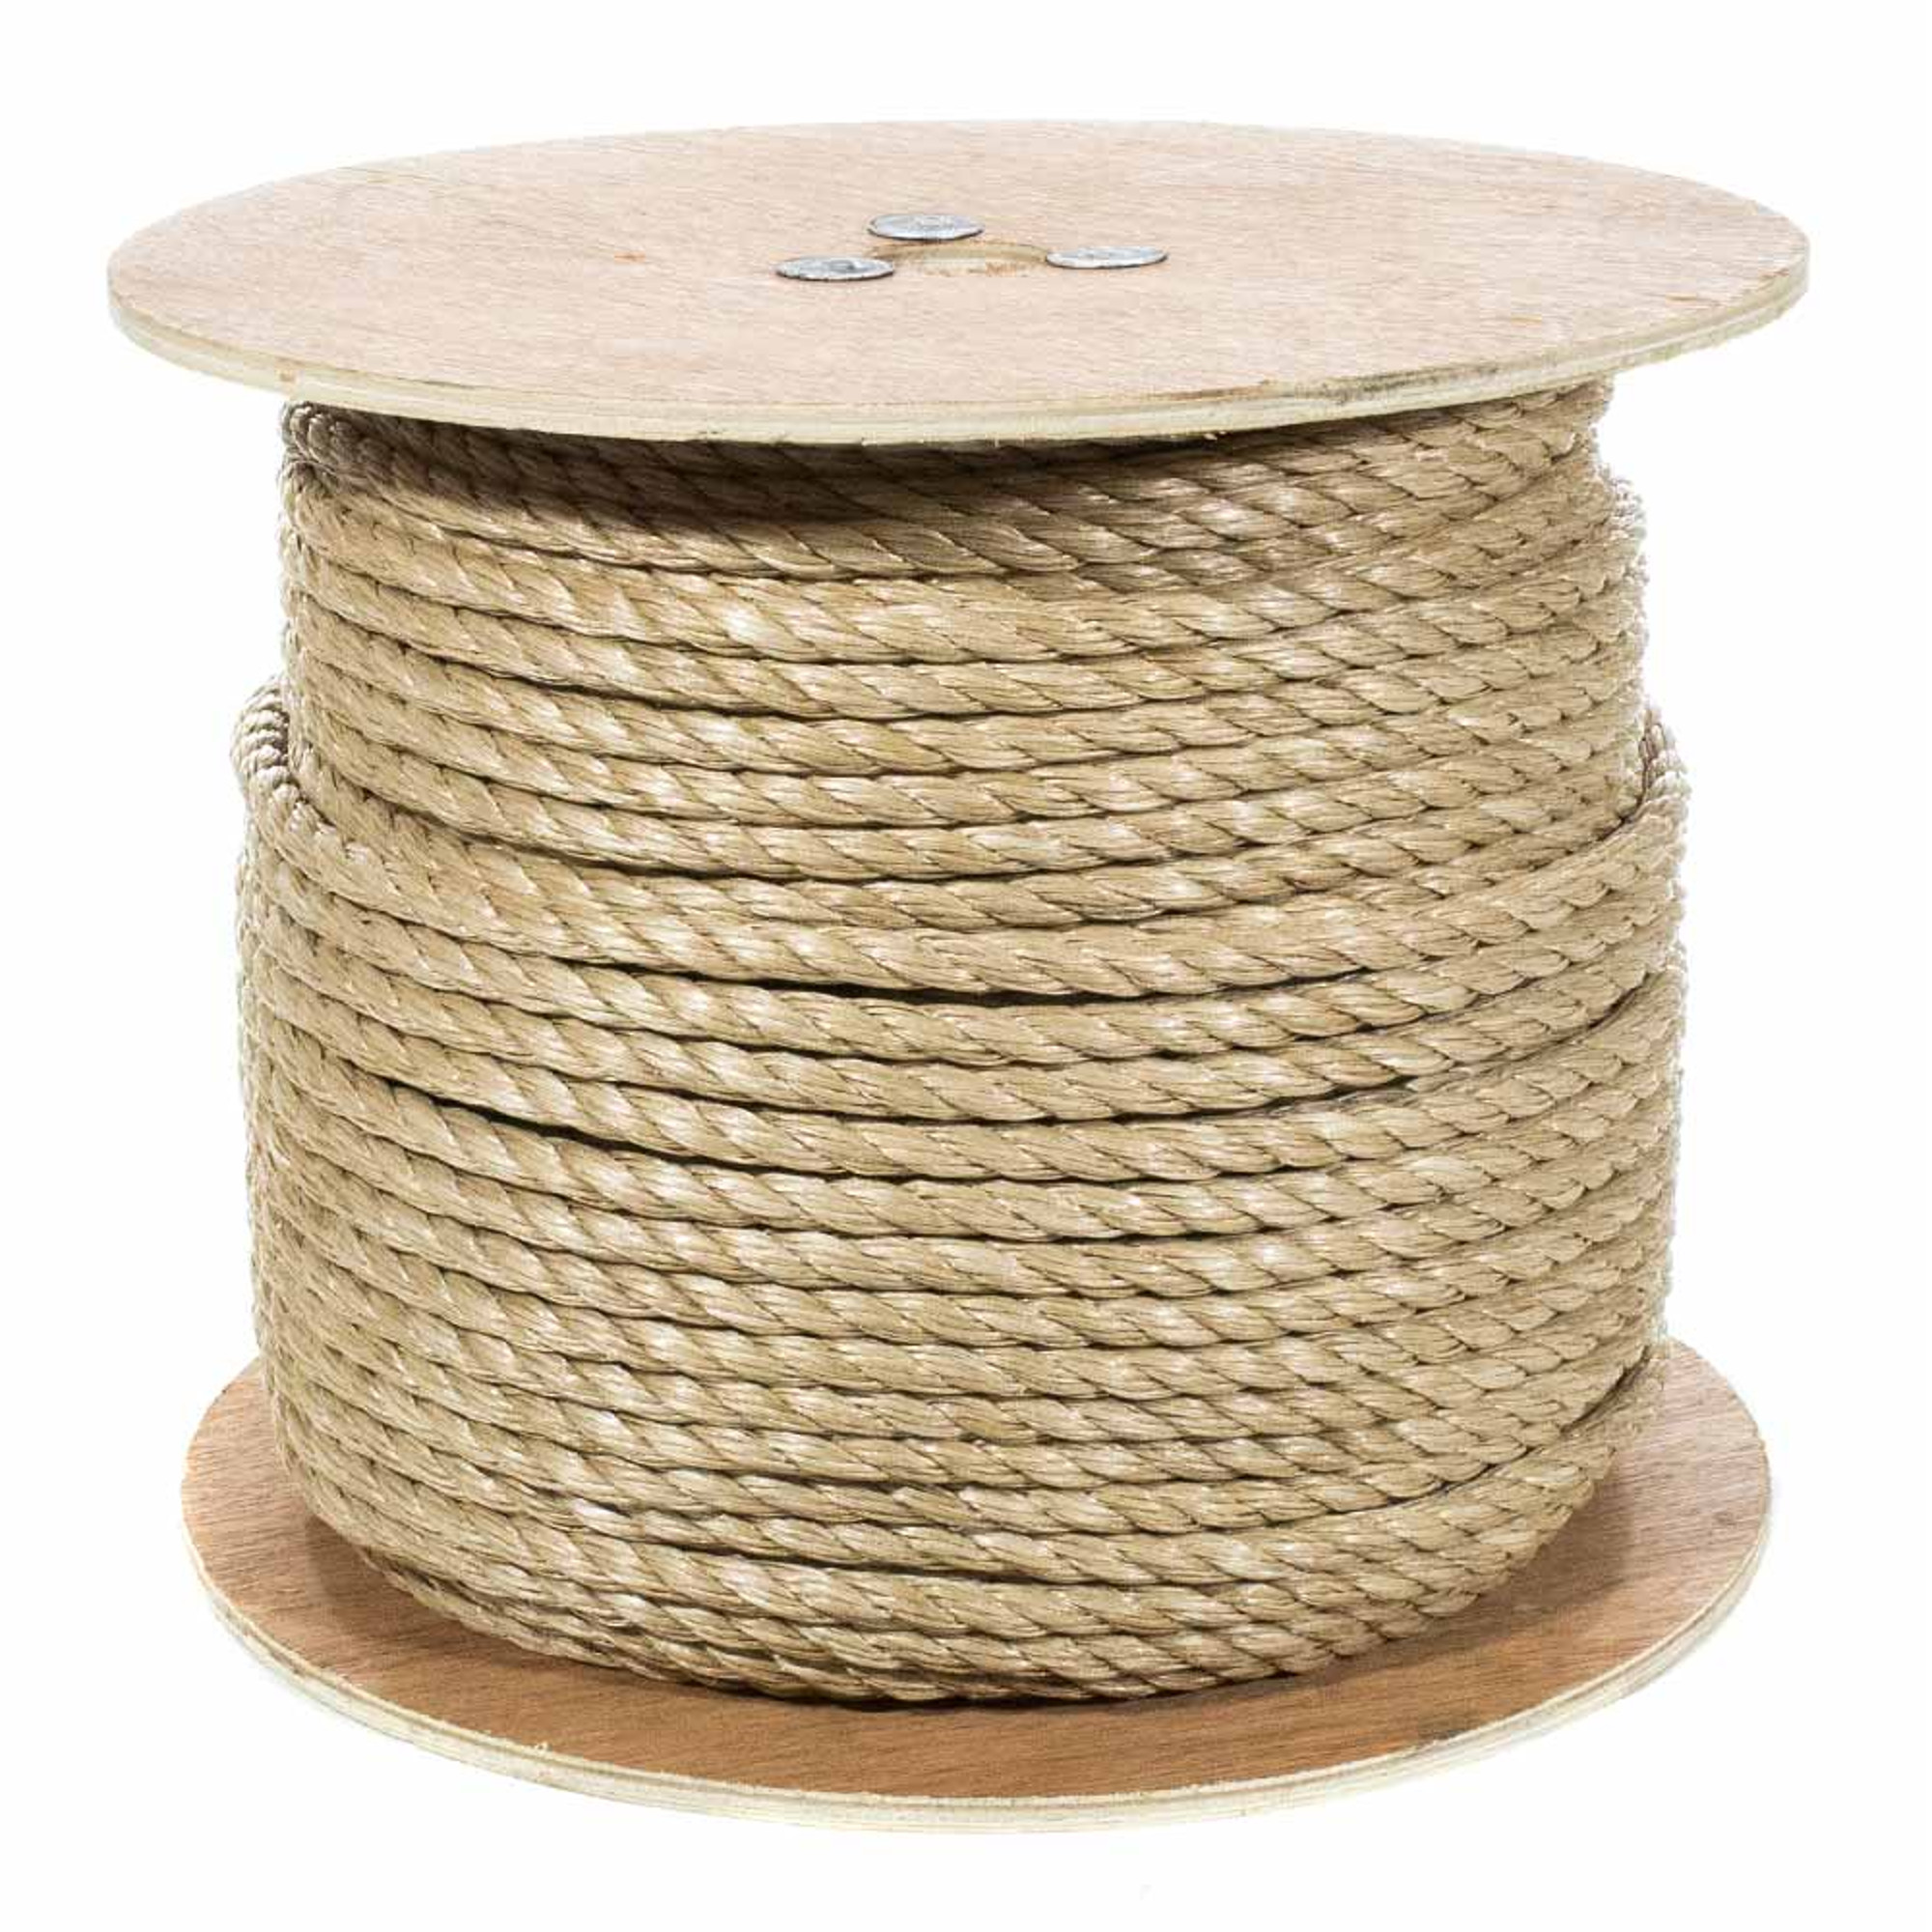 3 Strand Twisted ProManila Polypro Rope - Sizes range from 1/4 Inch - 2 Inch Diameters - 10-600Ft Lengths - image 1 of 2